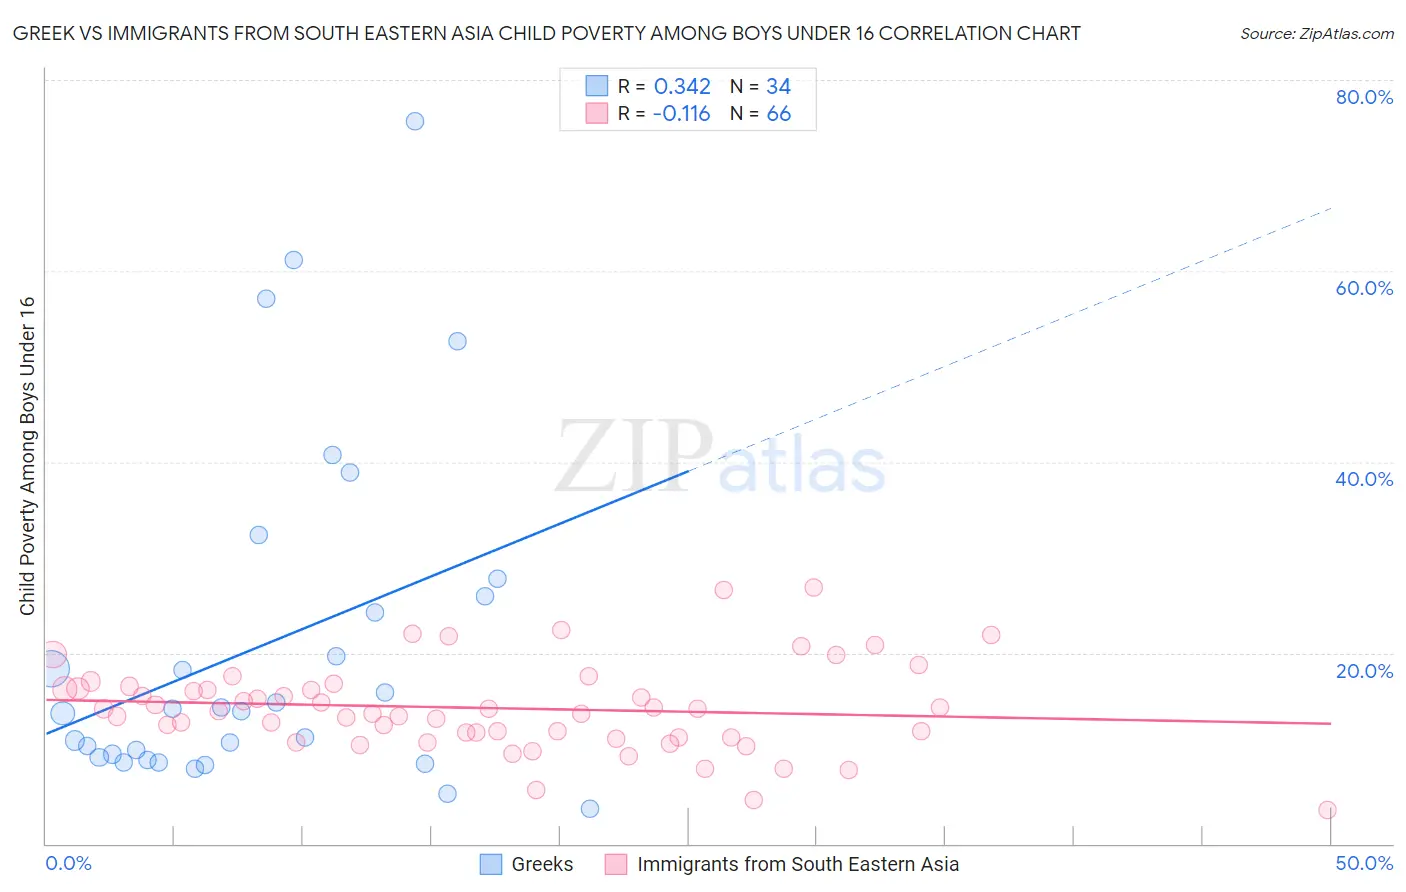 Greek vs Immigrants from South Eastern Asia Child Poverty Among Boys Under 16